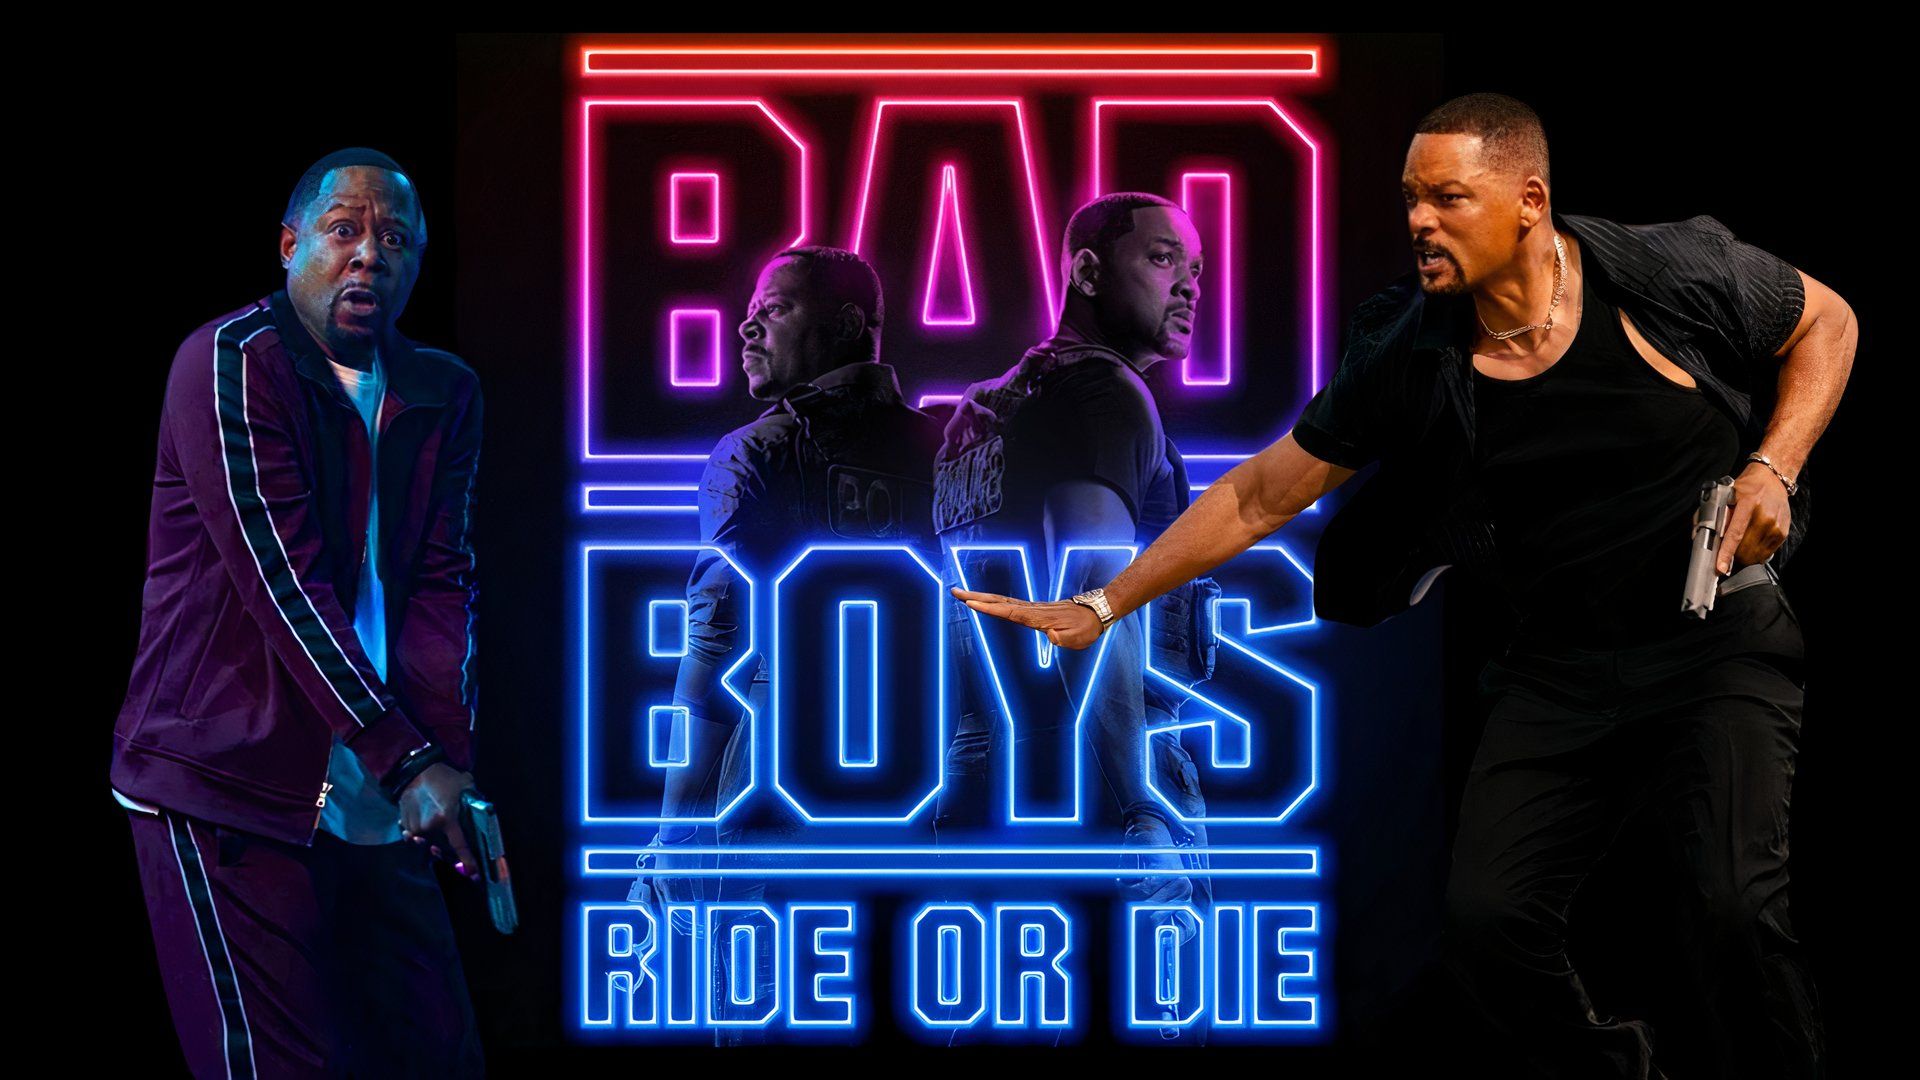 Bad Boys Ride or Die Review with Martin Lawrence and Will Smith